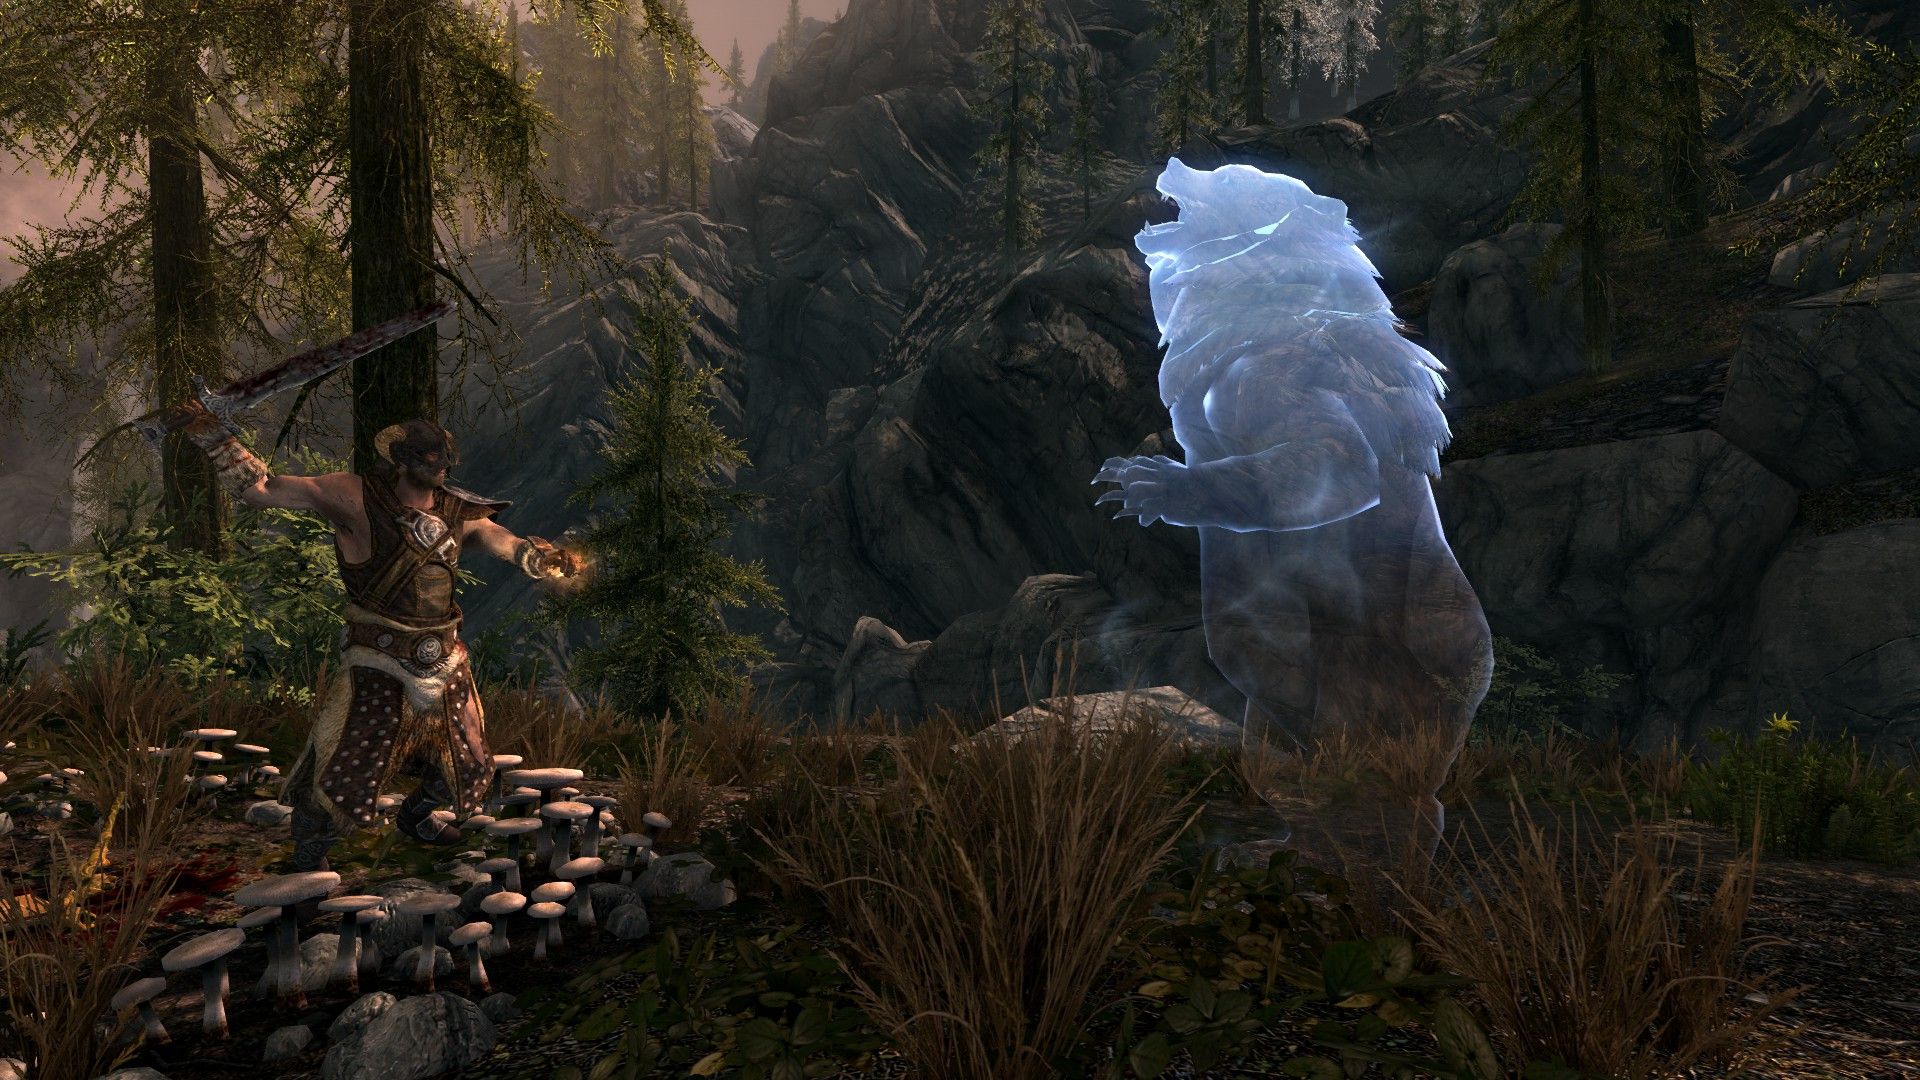 A man fights a ghostly bear deep in a forest, surrounded by trees and mushrooms.